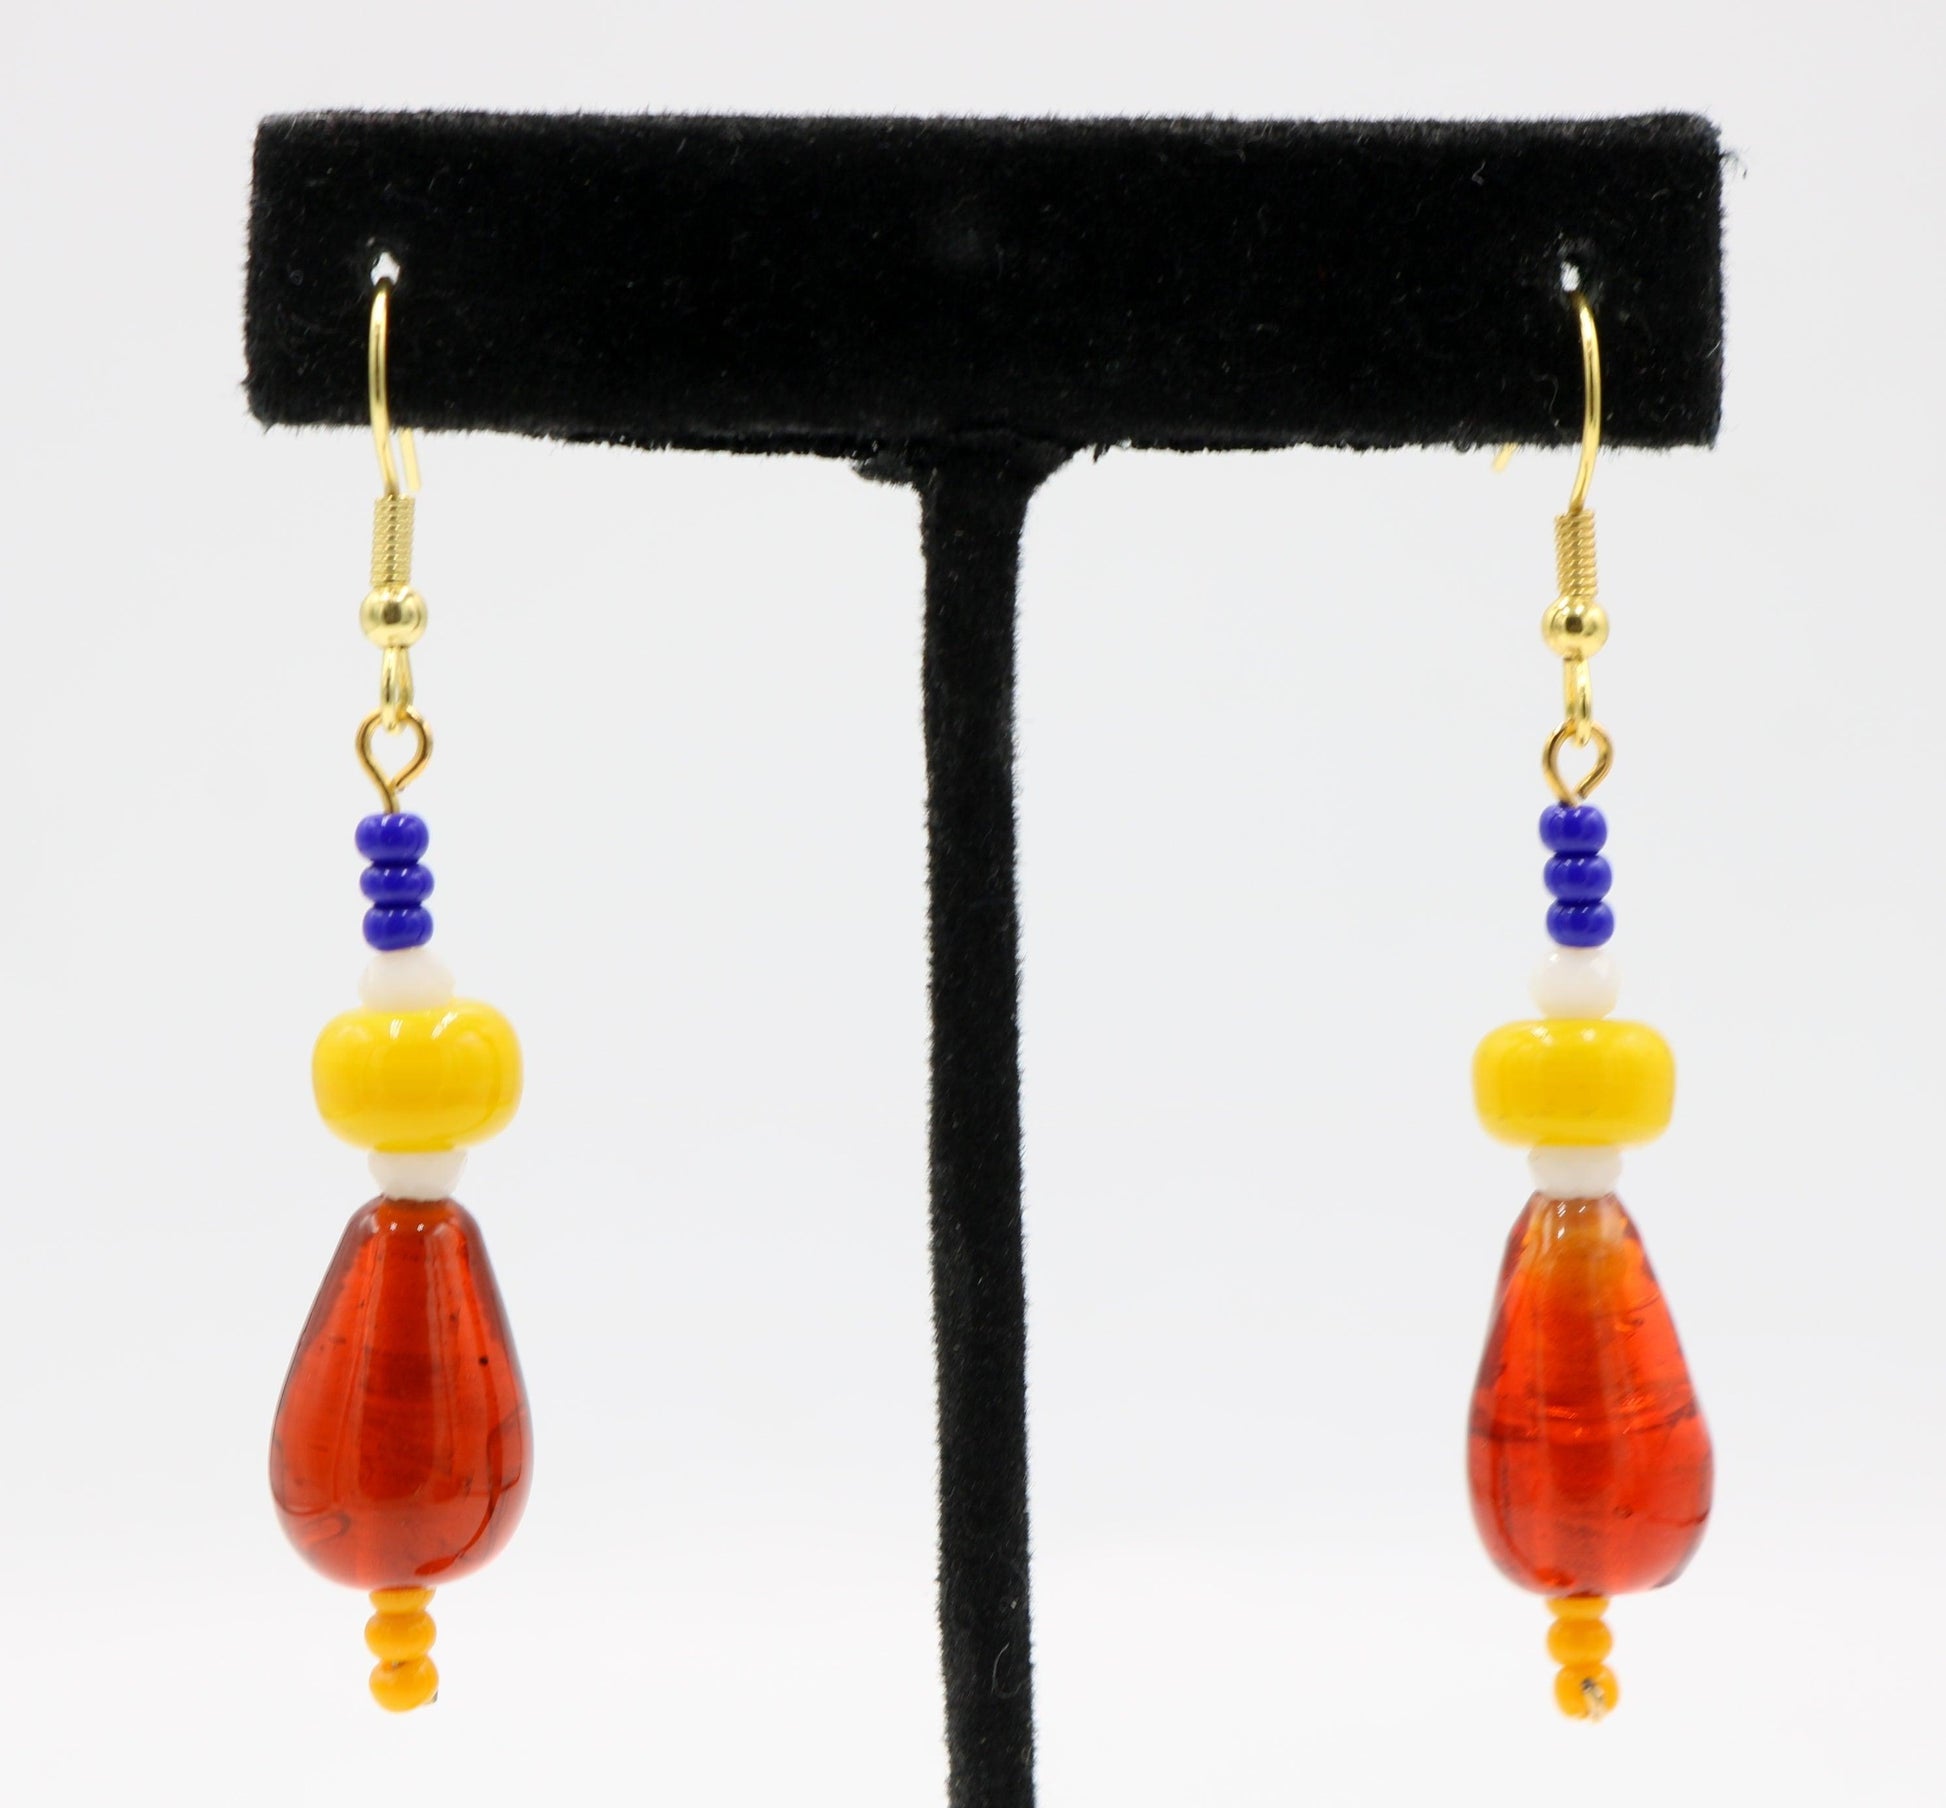 Primary in Love Glass 1 3/4” Long Dangle Earrings Women’s Gift 2022 - Vivid Vibrant Red, White, Yellow and Blue - Free Shipping - Monkeysmojo